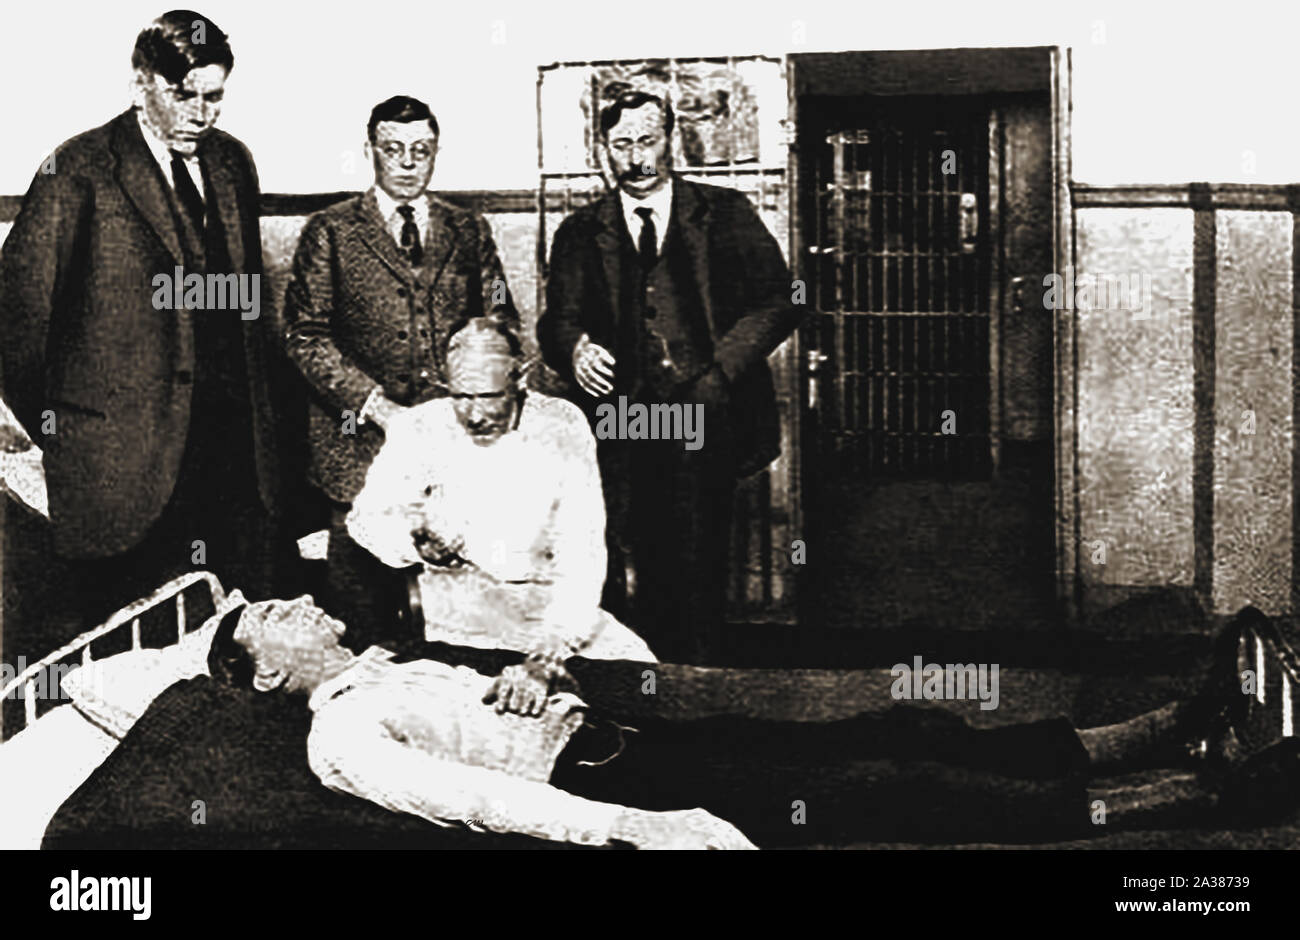 1930 periodical illustration - Law & Order in the USA -1930 newspaper picture of Dr R. E. House discoverer of  Scopolamine (Hyoscine) and  administering it as a truth drug in Dallas County Jail. With District Attorney  Cox, Senator Bowers and  Sheriff Harston stood behind him. Stock Photo